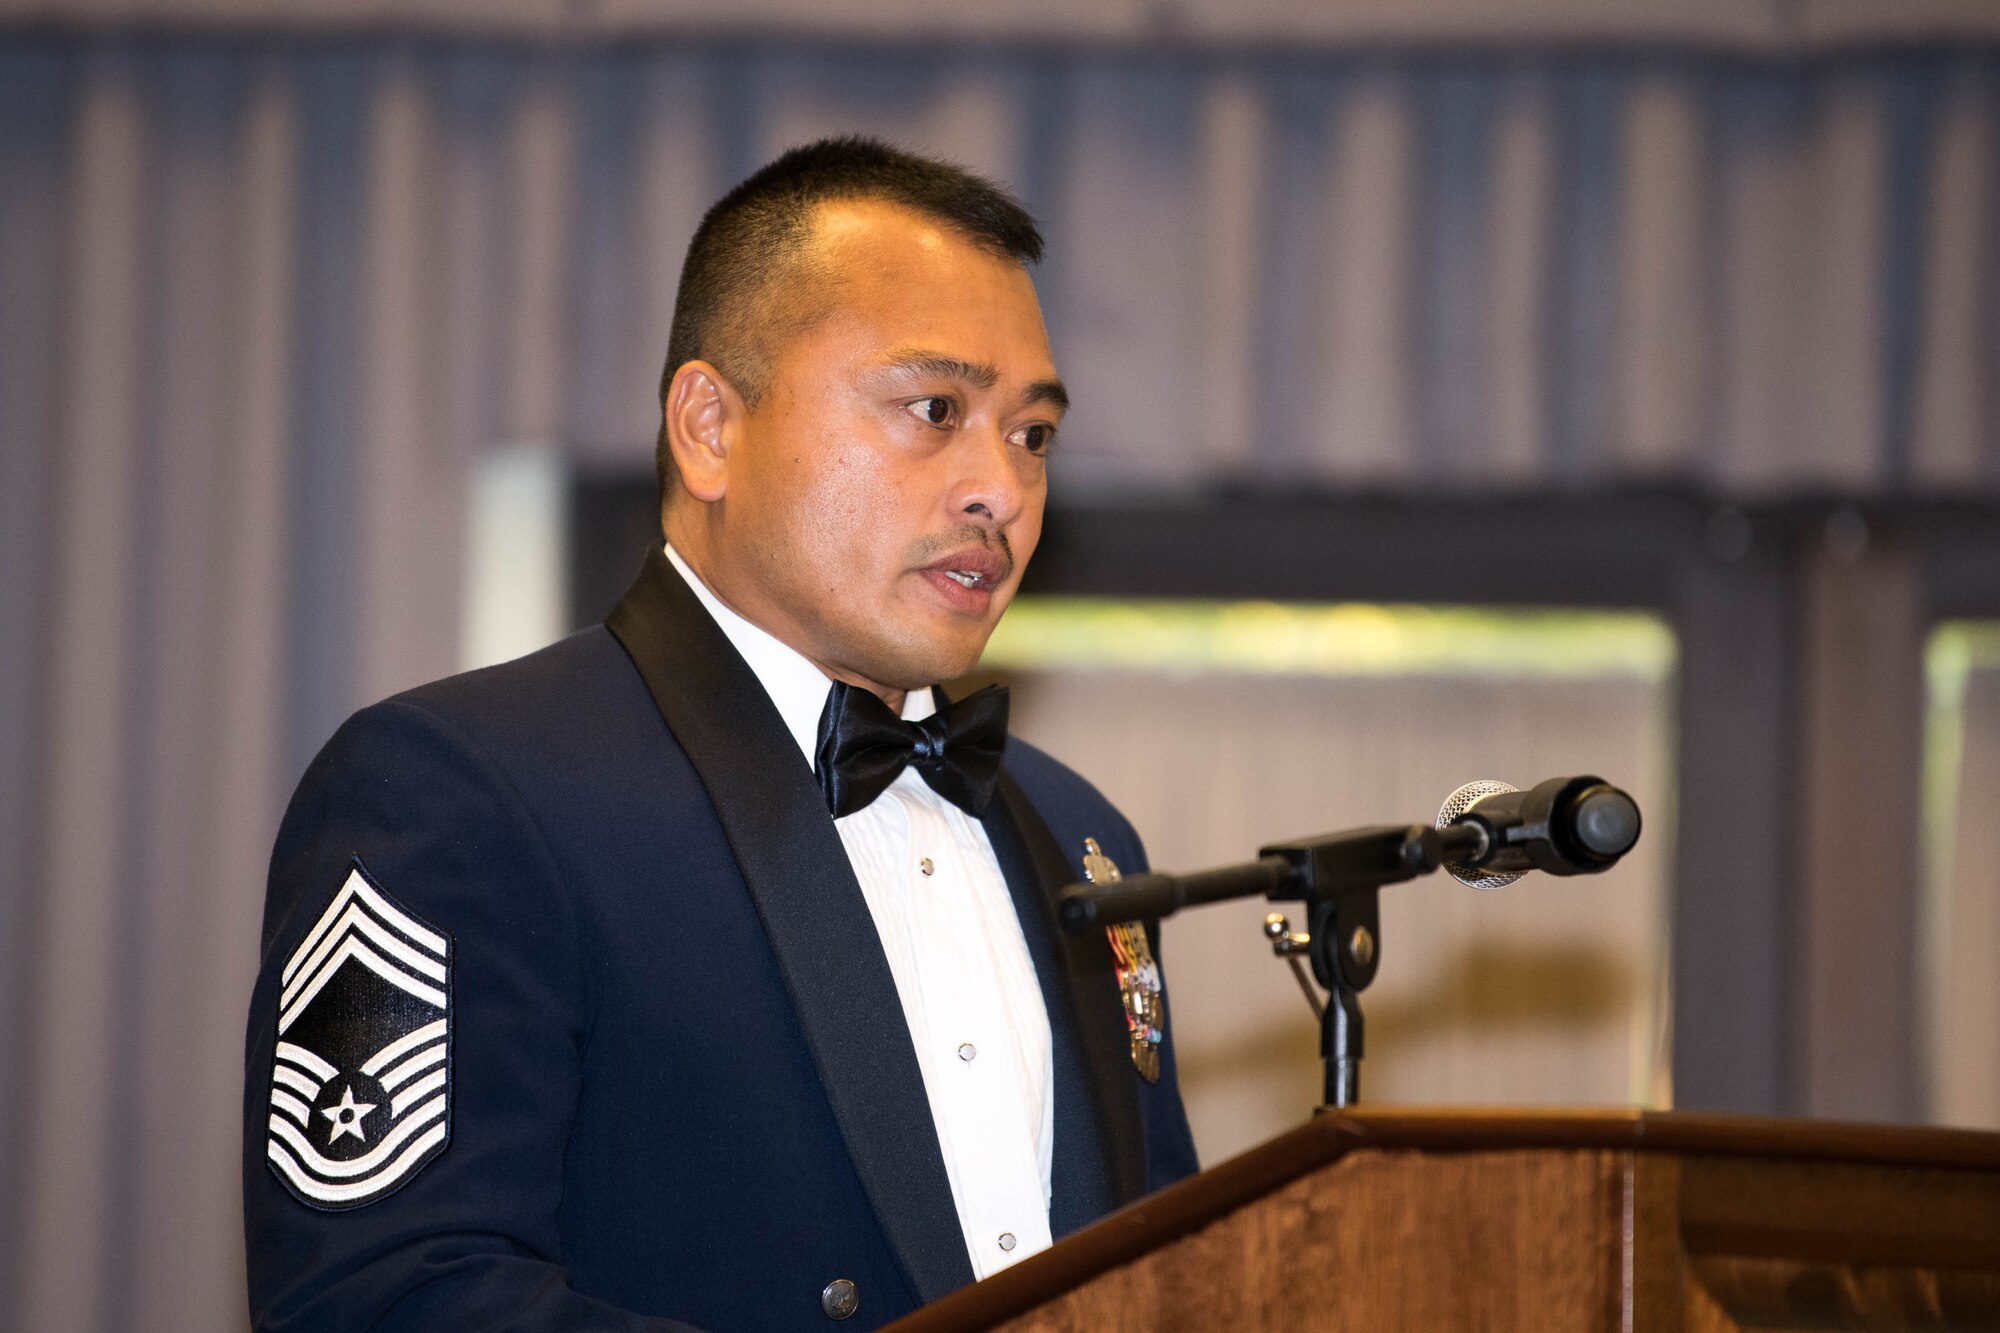 Chief Master Sgt. Darwin Mallari, 436th Force Support Squadron superintendent, speaks during the Staff Sgt. Julio Alonso Airman Leadership School, Class 21-F, dinner and graduation ceremony held at The Landings on Dover Air Force Base, Delaware, July 22, 2021. Mallari commented on seeing smiling faces in person, and not virtually, to celebrate the accomplishments of our newest Air Force supervisors. (U.S. Air Force photo by Mauricio Campino)